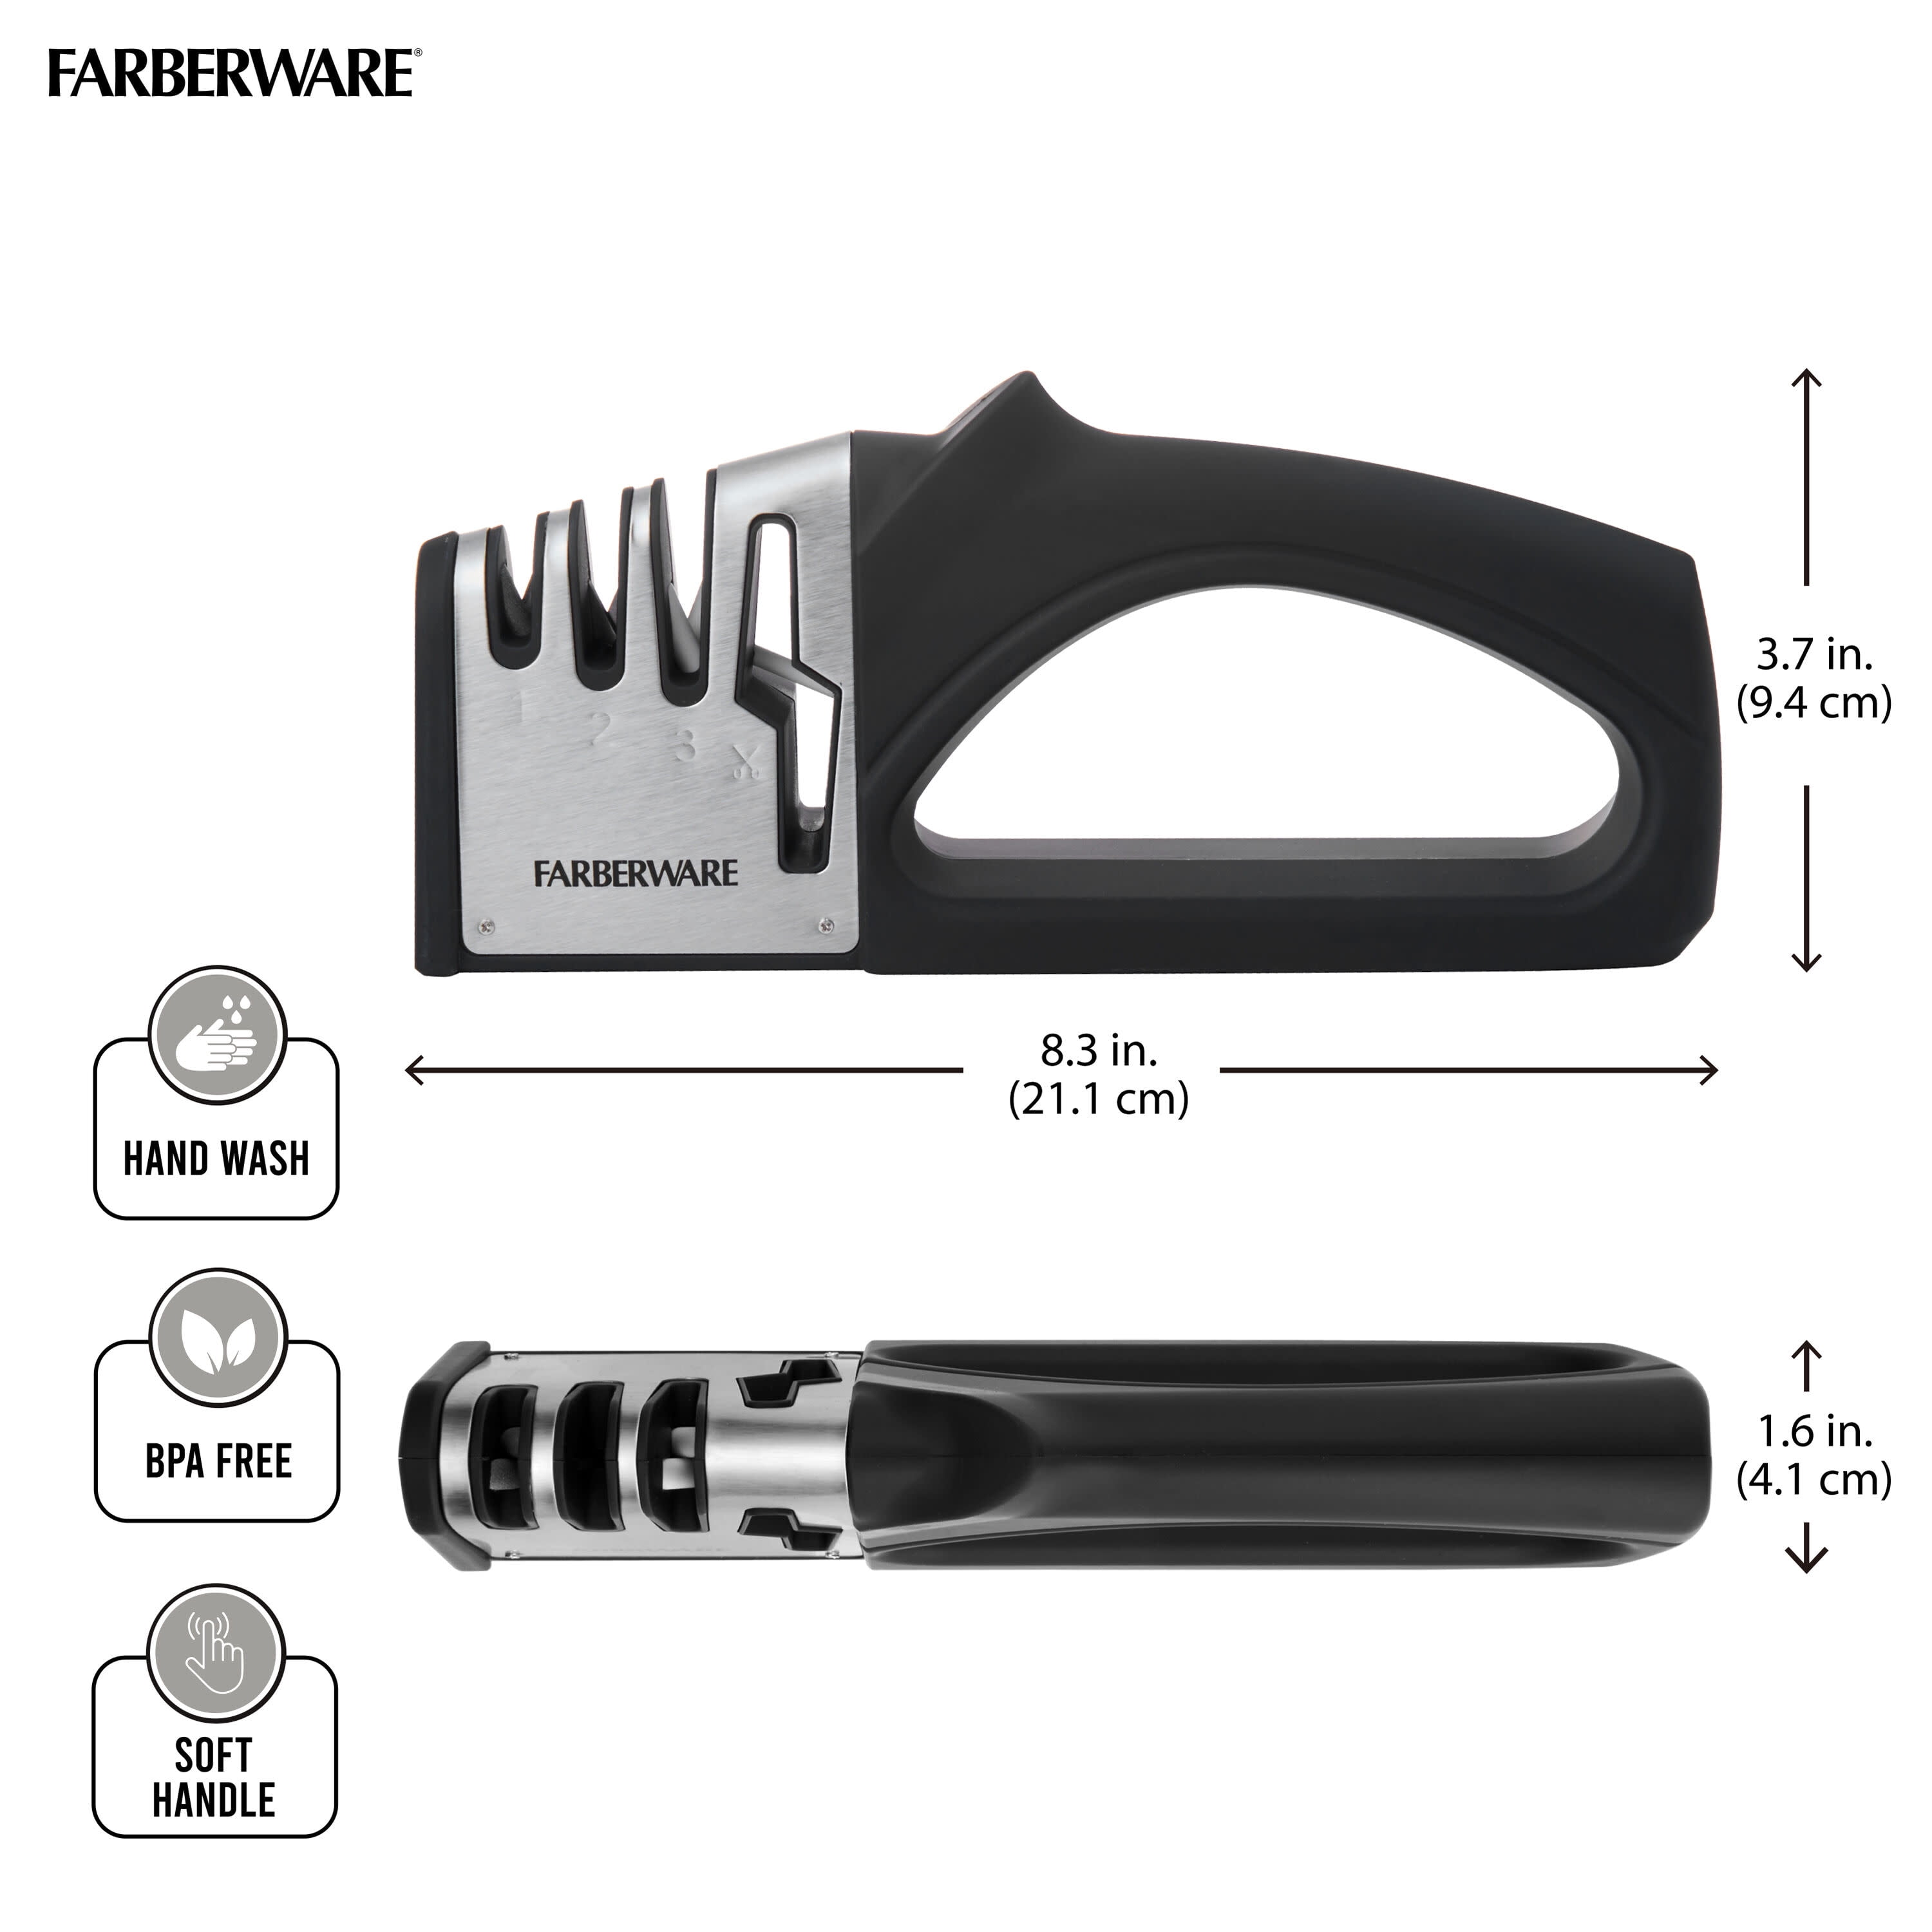 Farberware Two-Stage Smartsharp Knife Sharpener, Easy-To-Use Nonslip  Sharpener With Color Changing LED Light Indicator, Knife Sharpening System  To Polish, Sharpen And Repair Kitchen Knives, Black